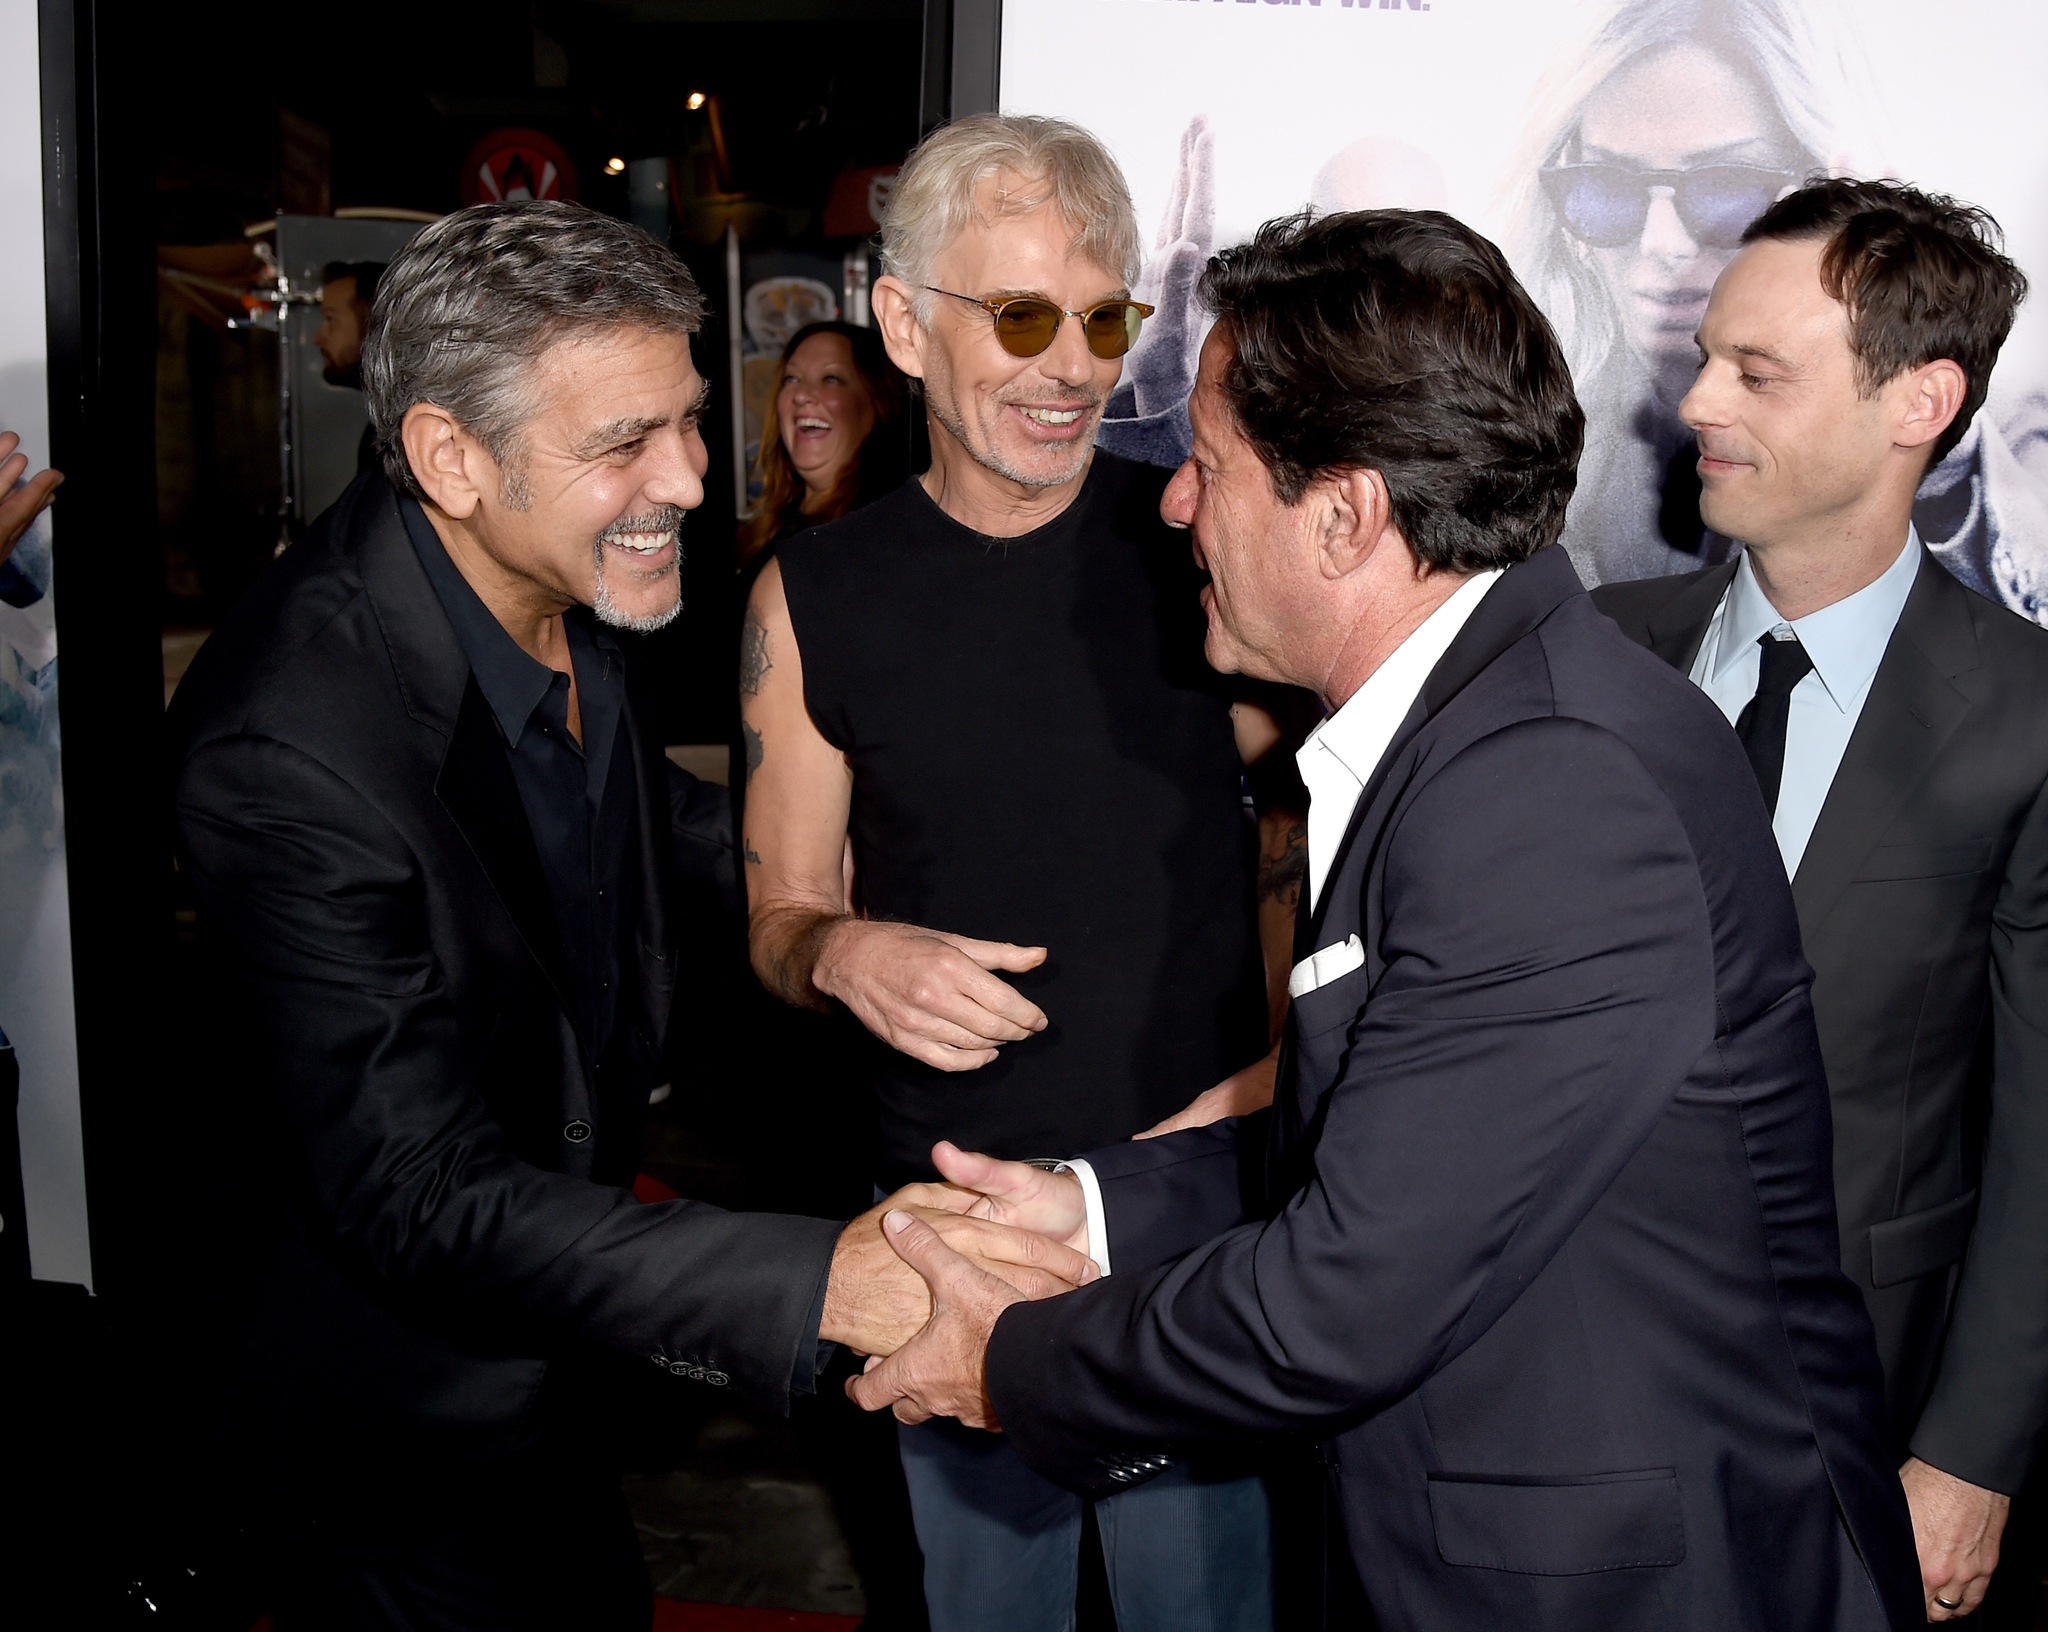 George Clooney, Billy Bob Thornton, Joaquim de Almeida and Scoot McNairy at event of Our Brand Is Crisis (2015)